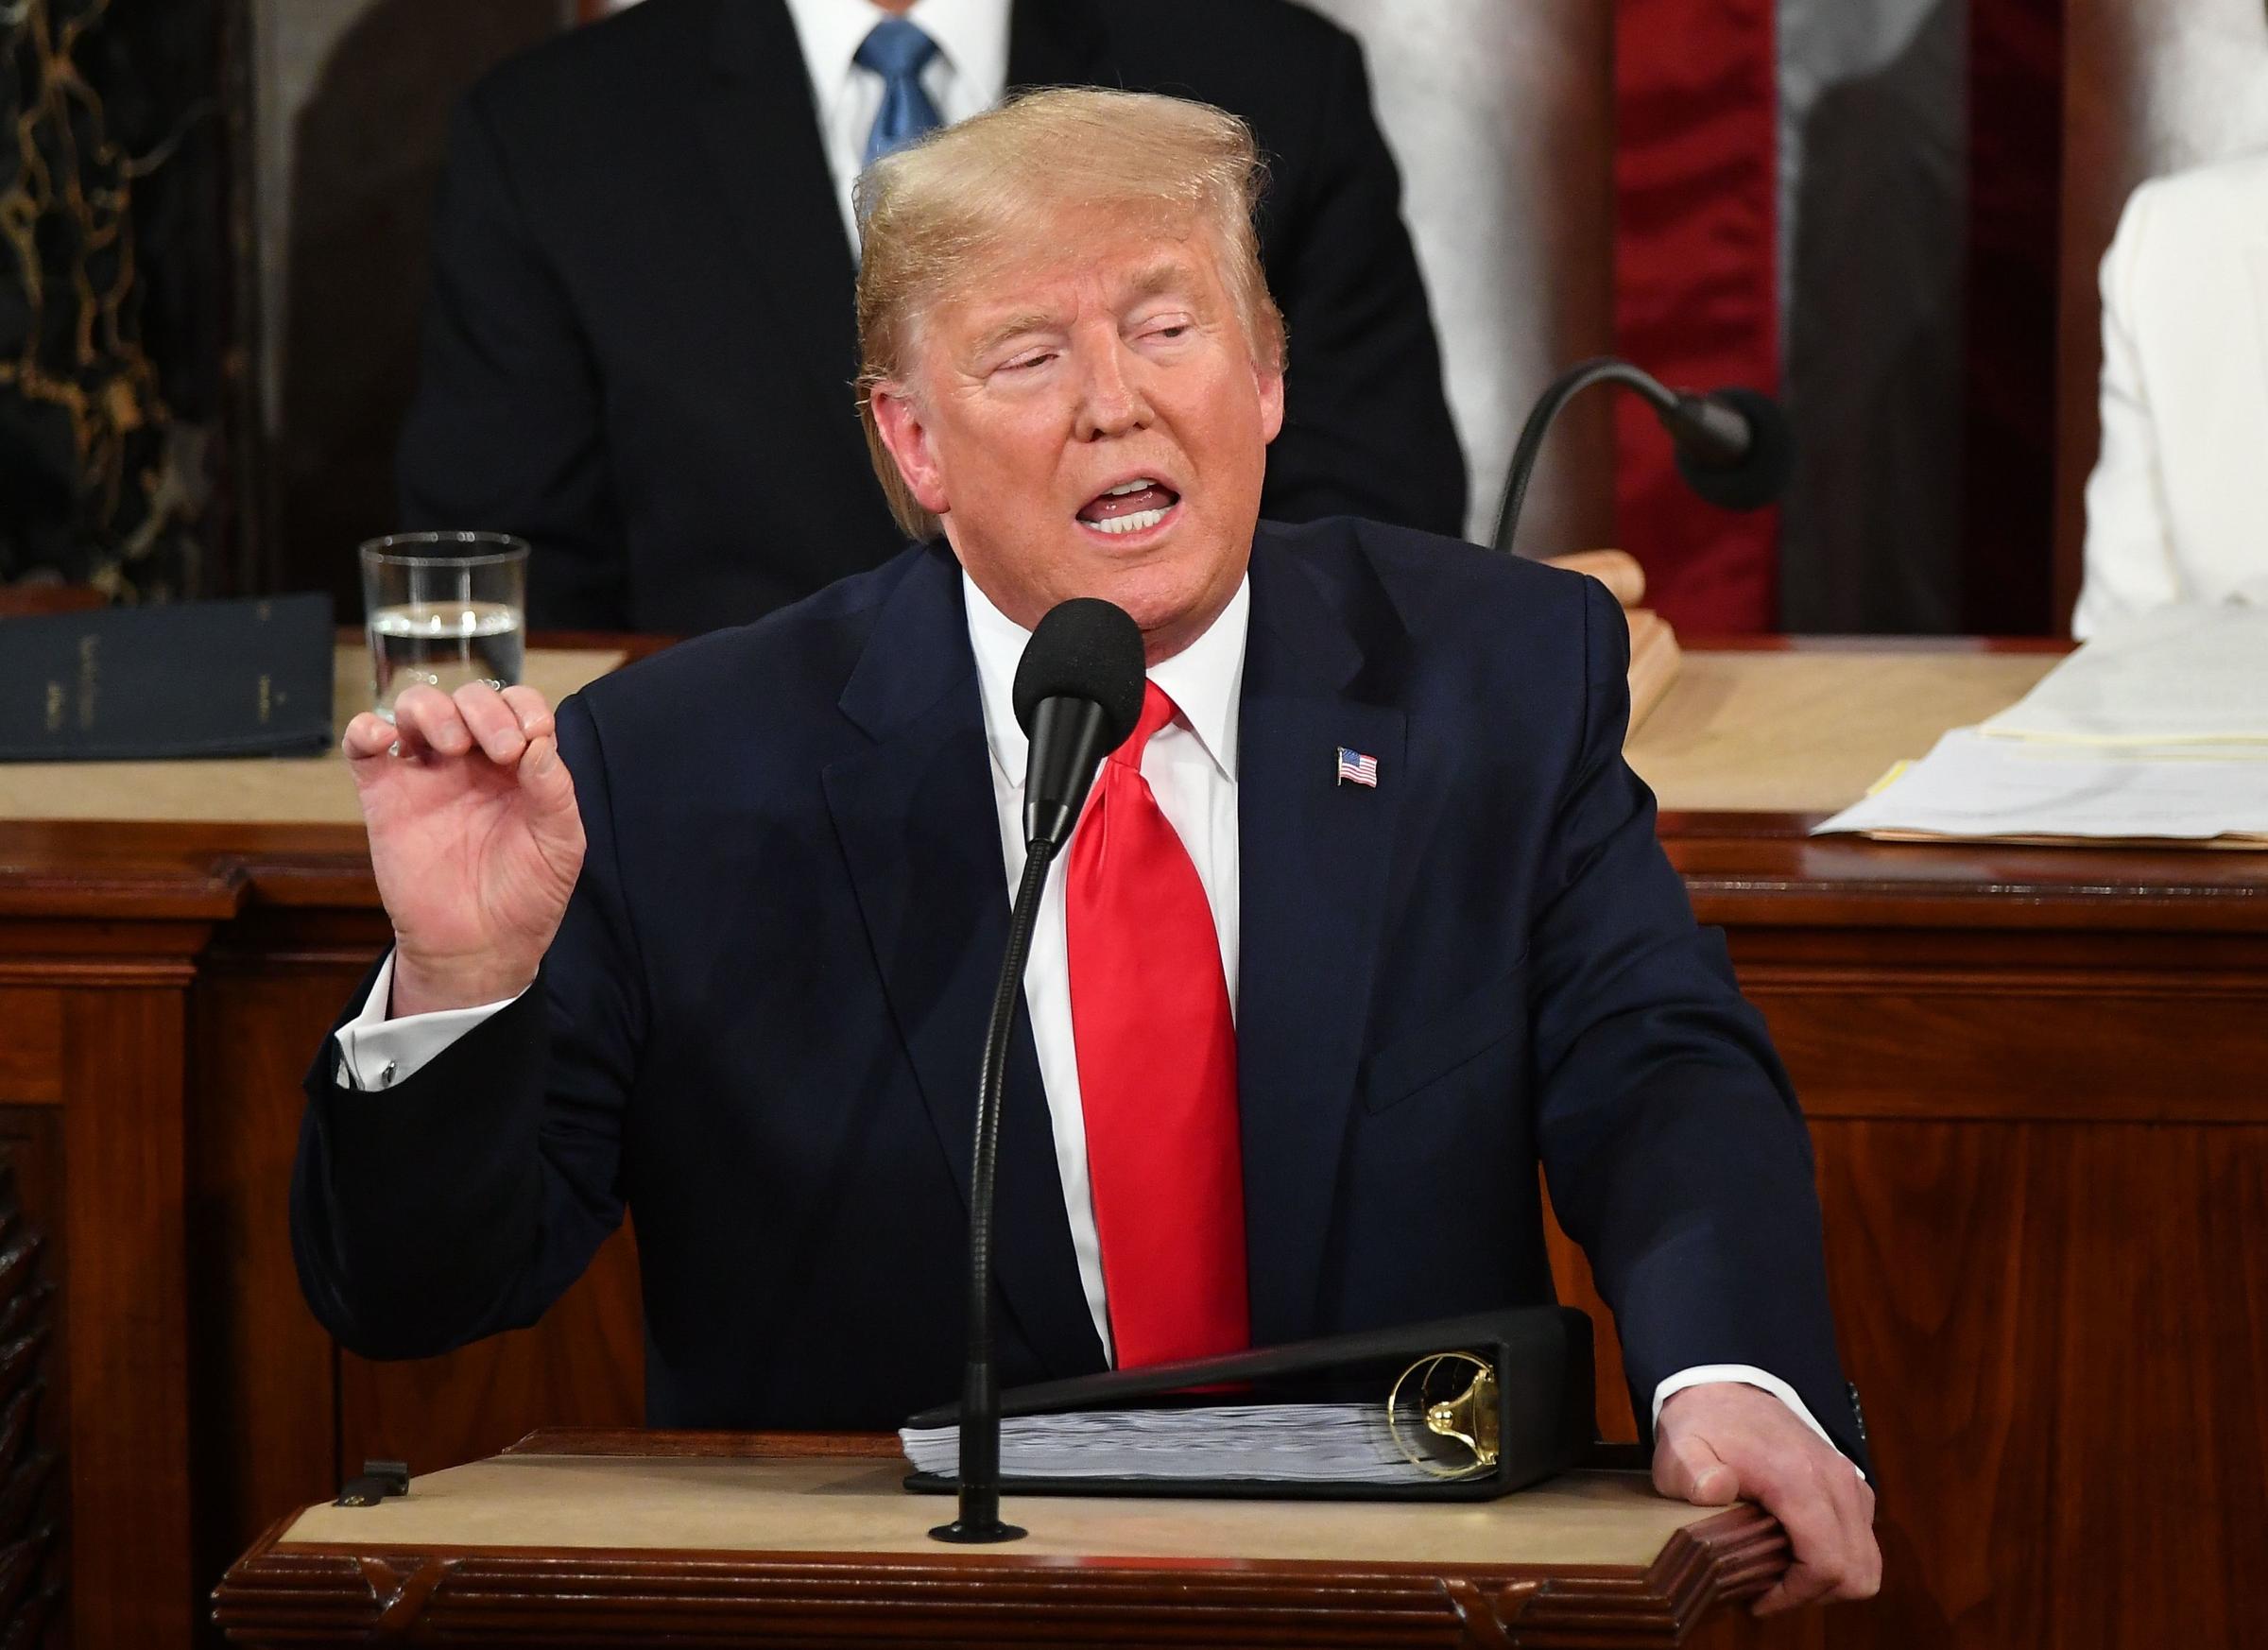 FACT CHECK Trump Delivers State Of The Union To Tense, Partisan